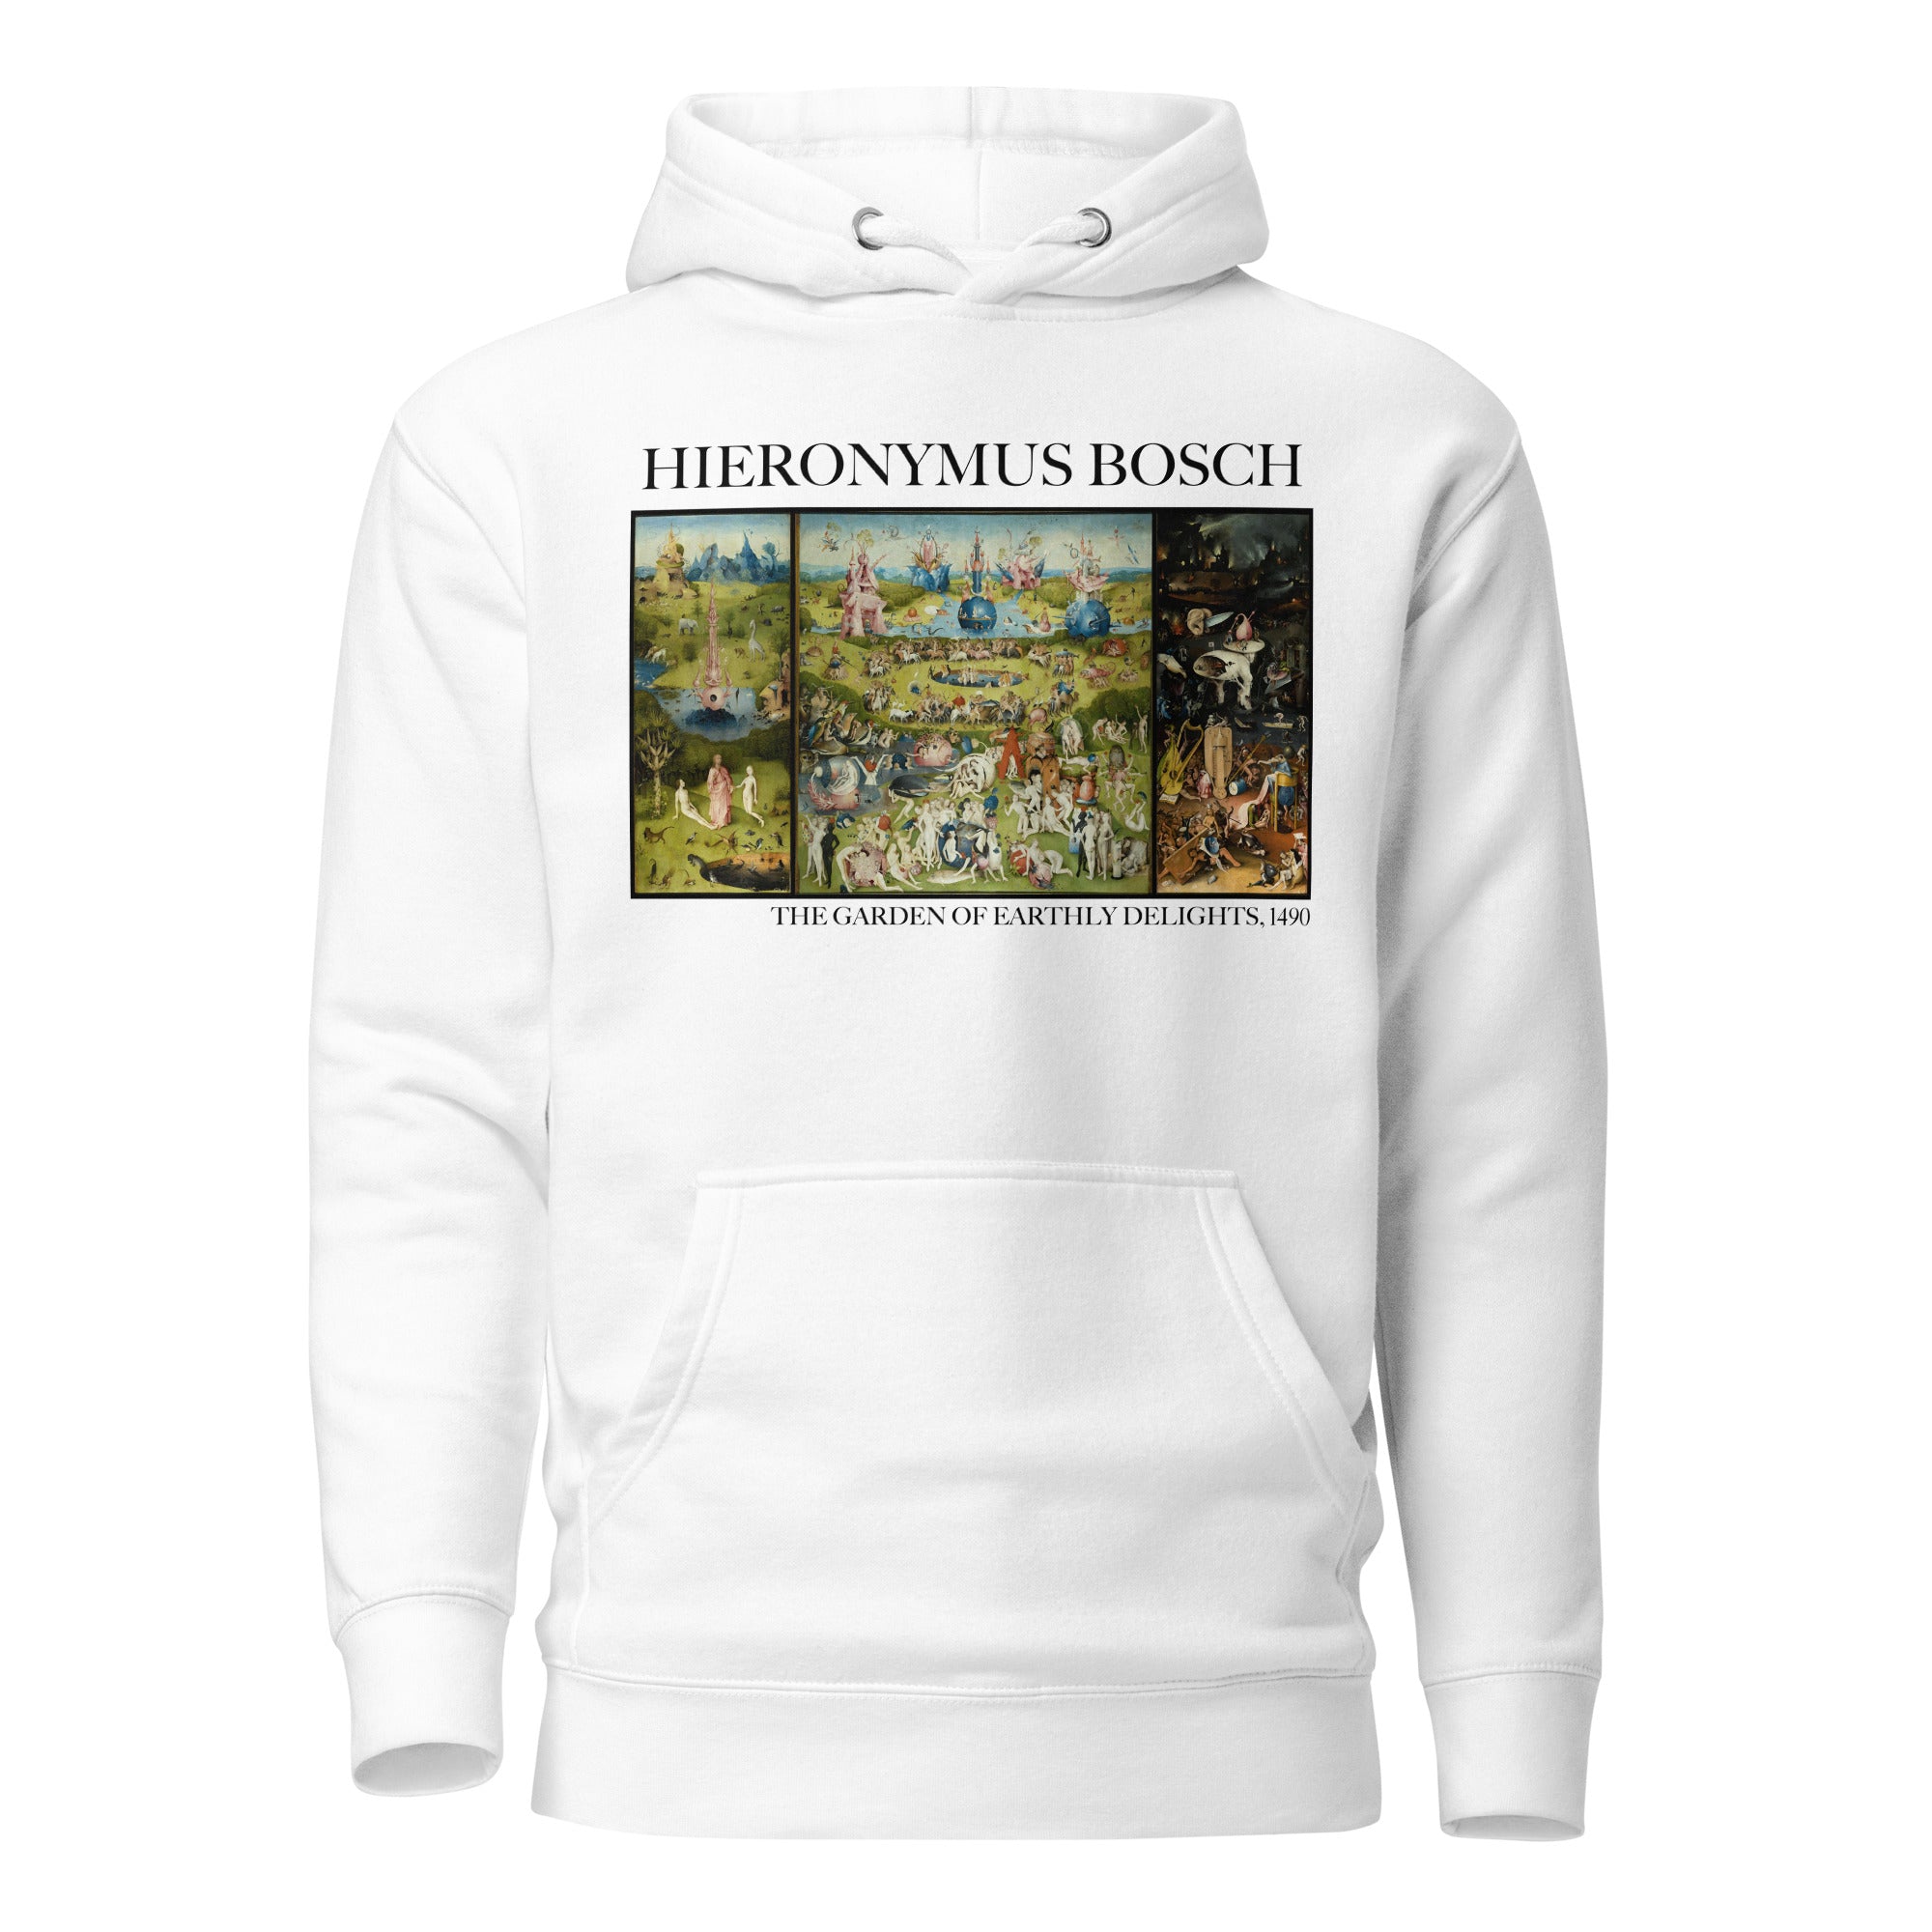 Hieronymus Bosch 'The Garden of Earthly Delights' Famous Painting Hoodie | Unisex Premium Art Hoodie